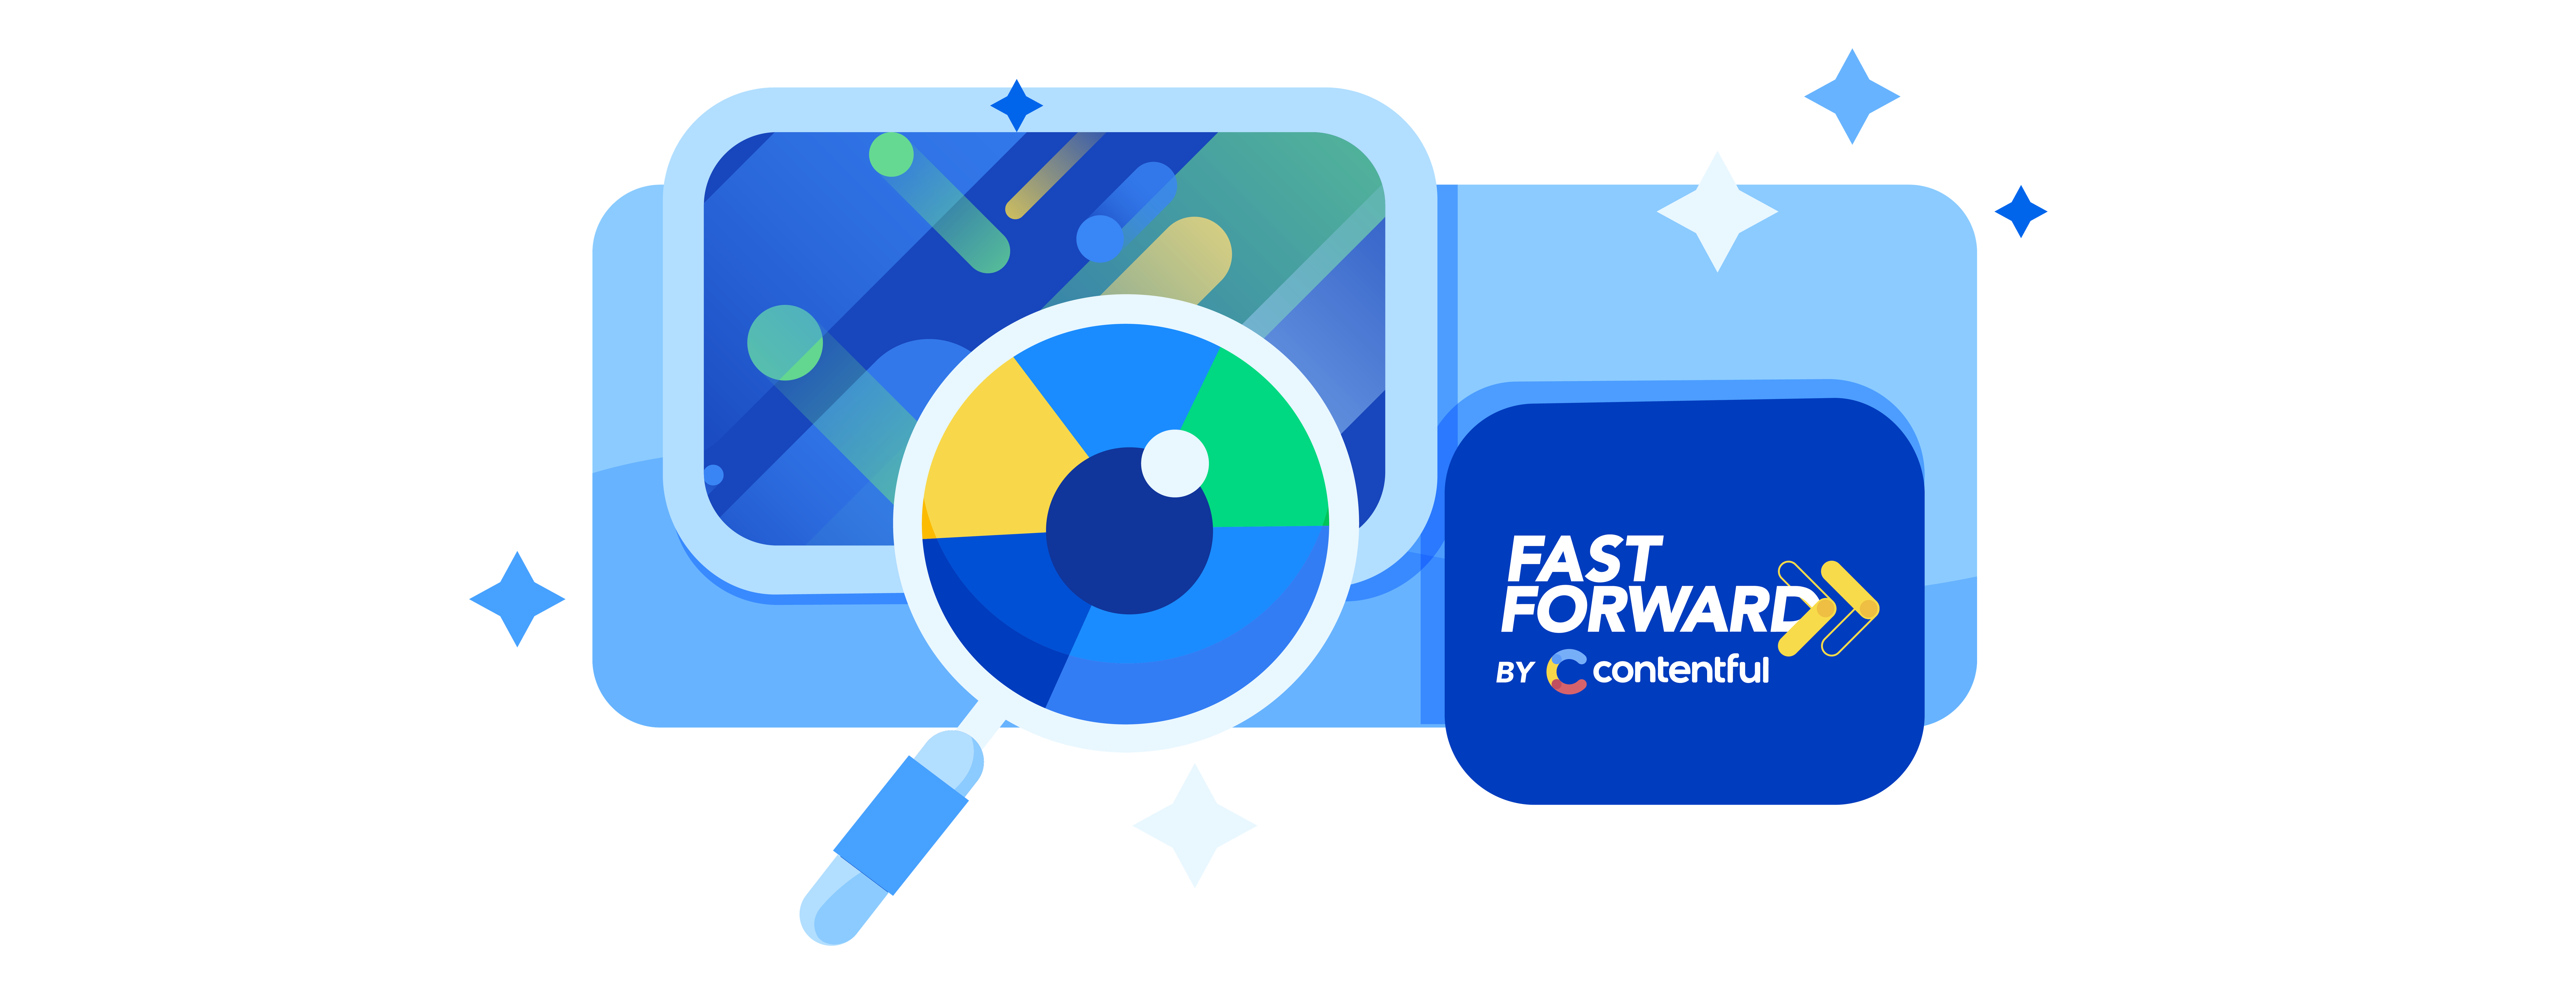 A final shout out to Fast Forward 2021, our annual, digital three-day conference – it really covered a lot of ground, including new Contentful features, informative workshops and music by Contentful’s in-house band, the Content Types.